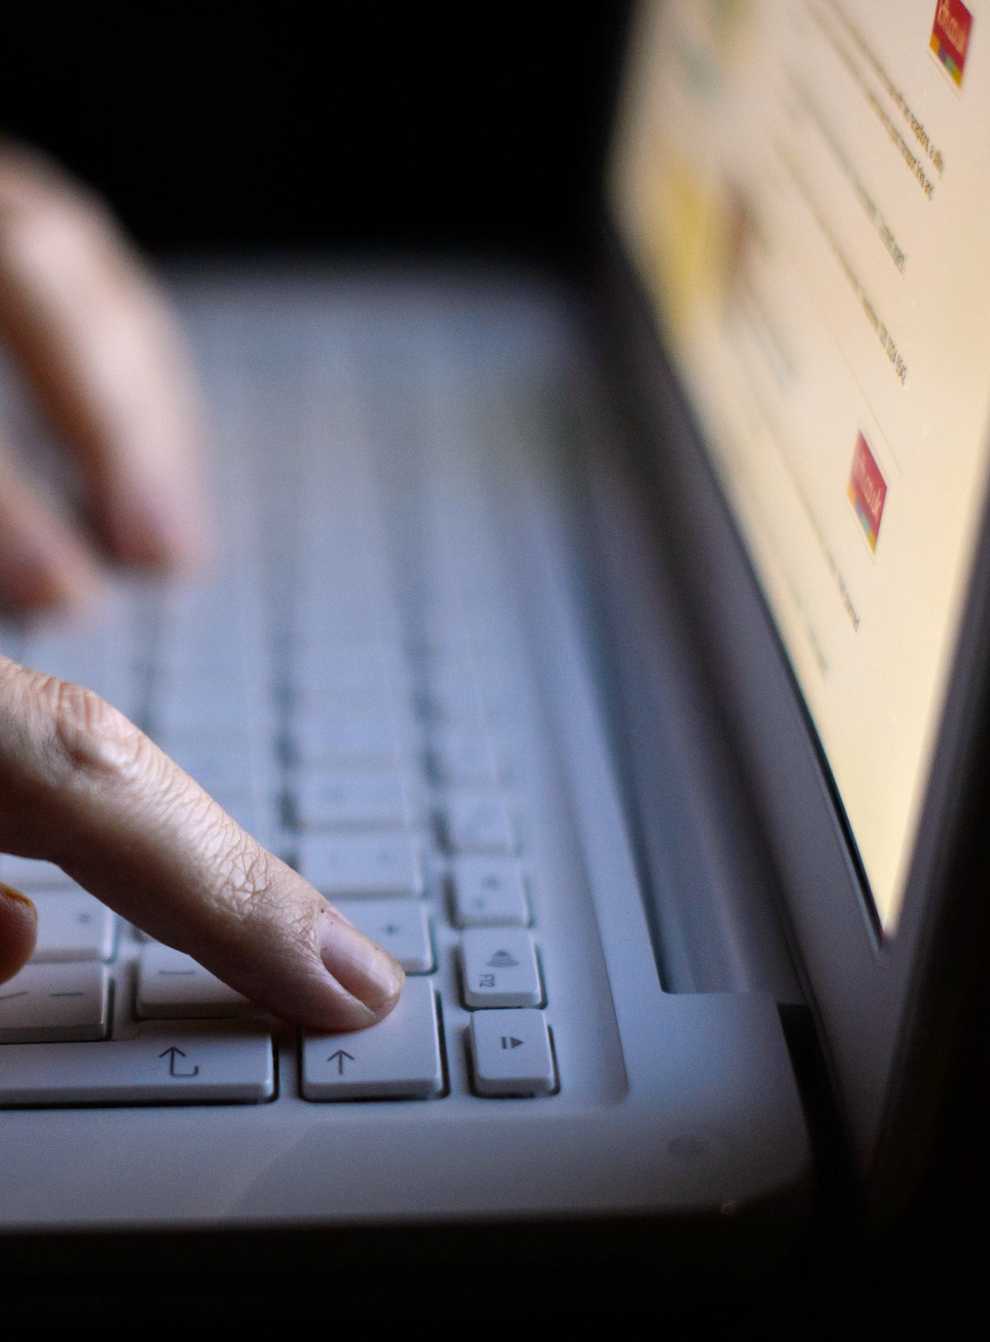 A massive international fraud sting has brought down a website described as an ‘online fraud shop’ by UK police (Dominic Lipinski/PA)